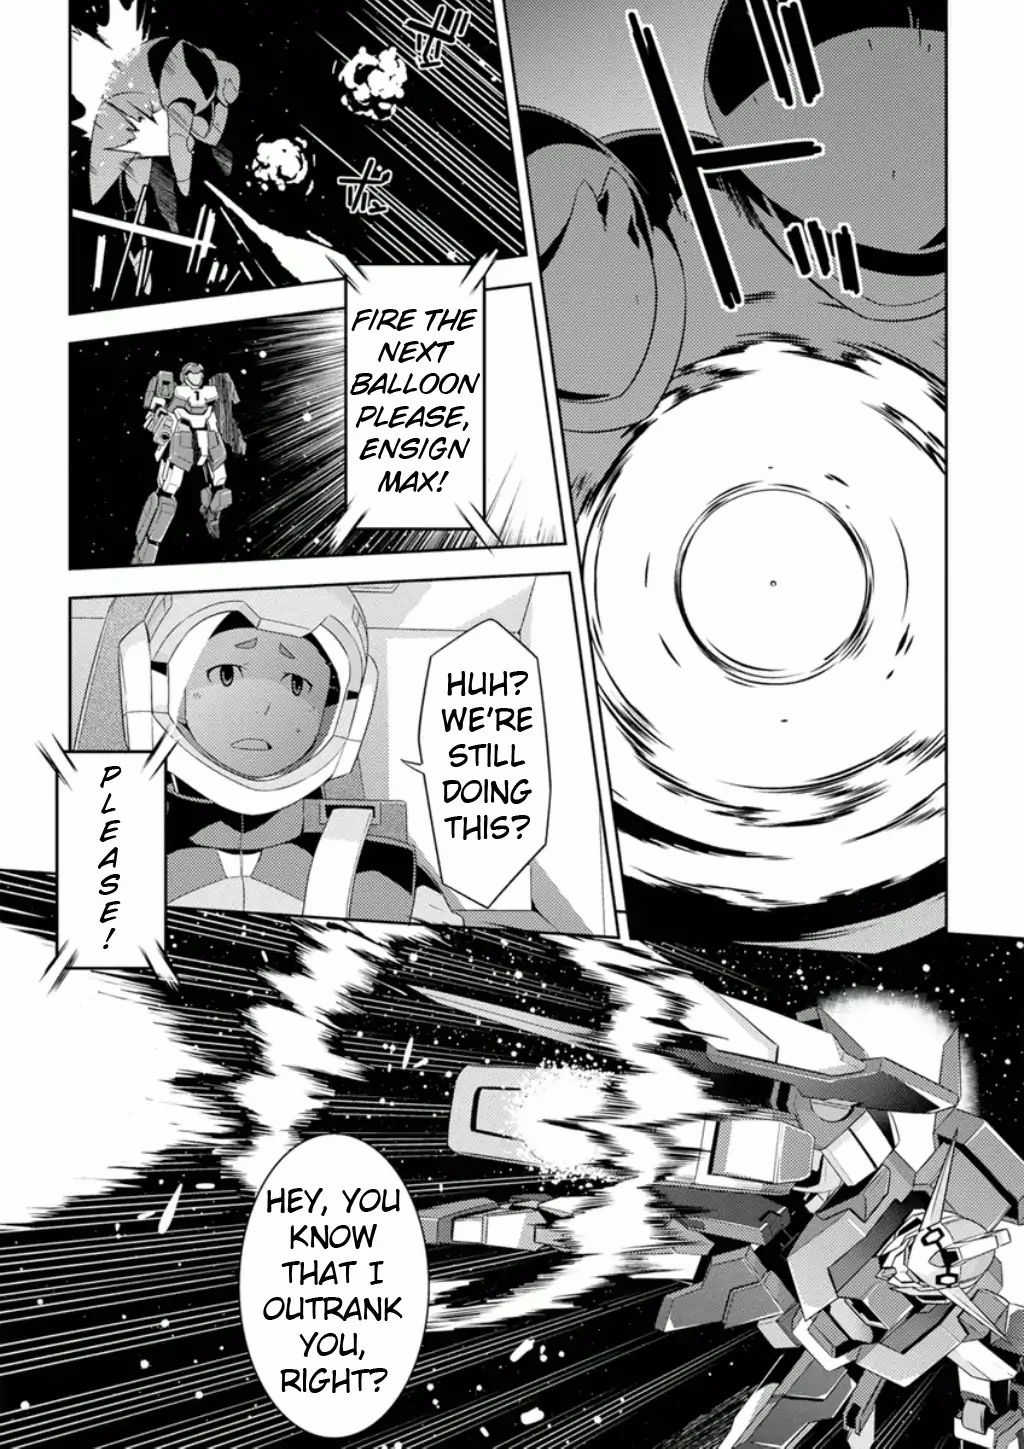 Mobile Suit Gundam Age - Second Evolution Vol.2 Chapter 7: Earth, This Is Eden - Picture 3